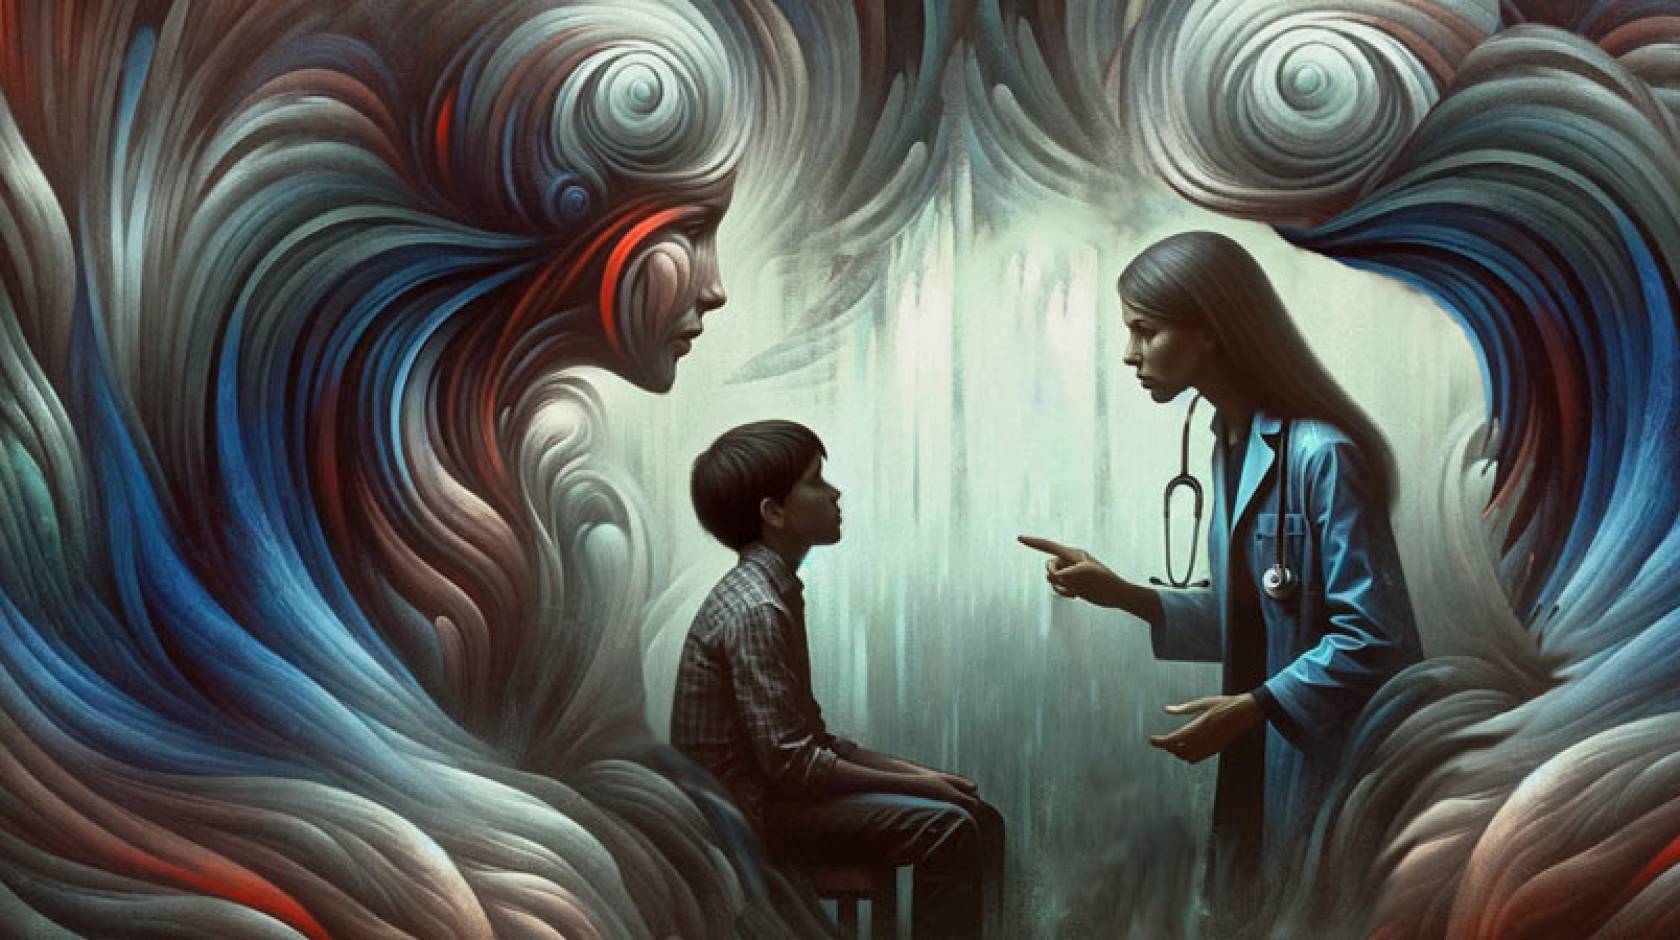 An illustration of a woman doctor speaking to a child, who has a mythical, looming head overlooking him